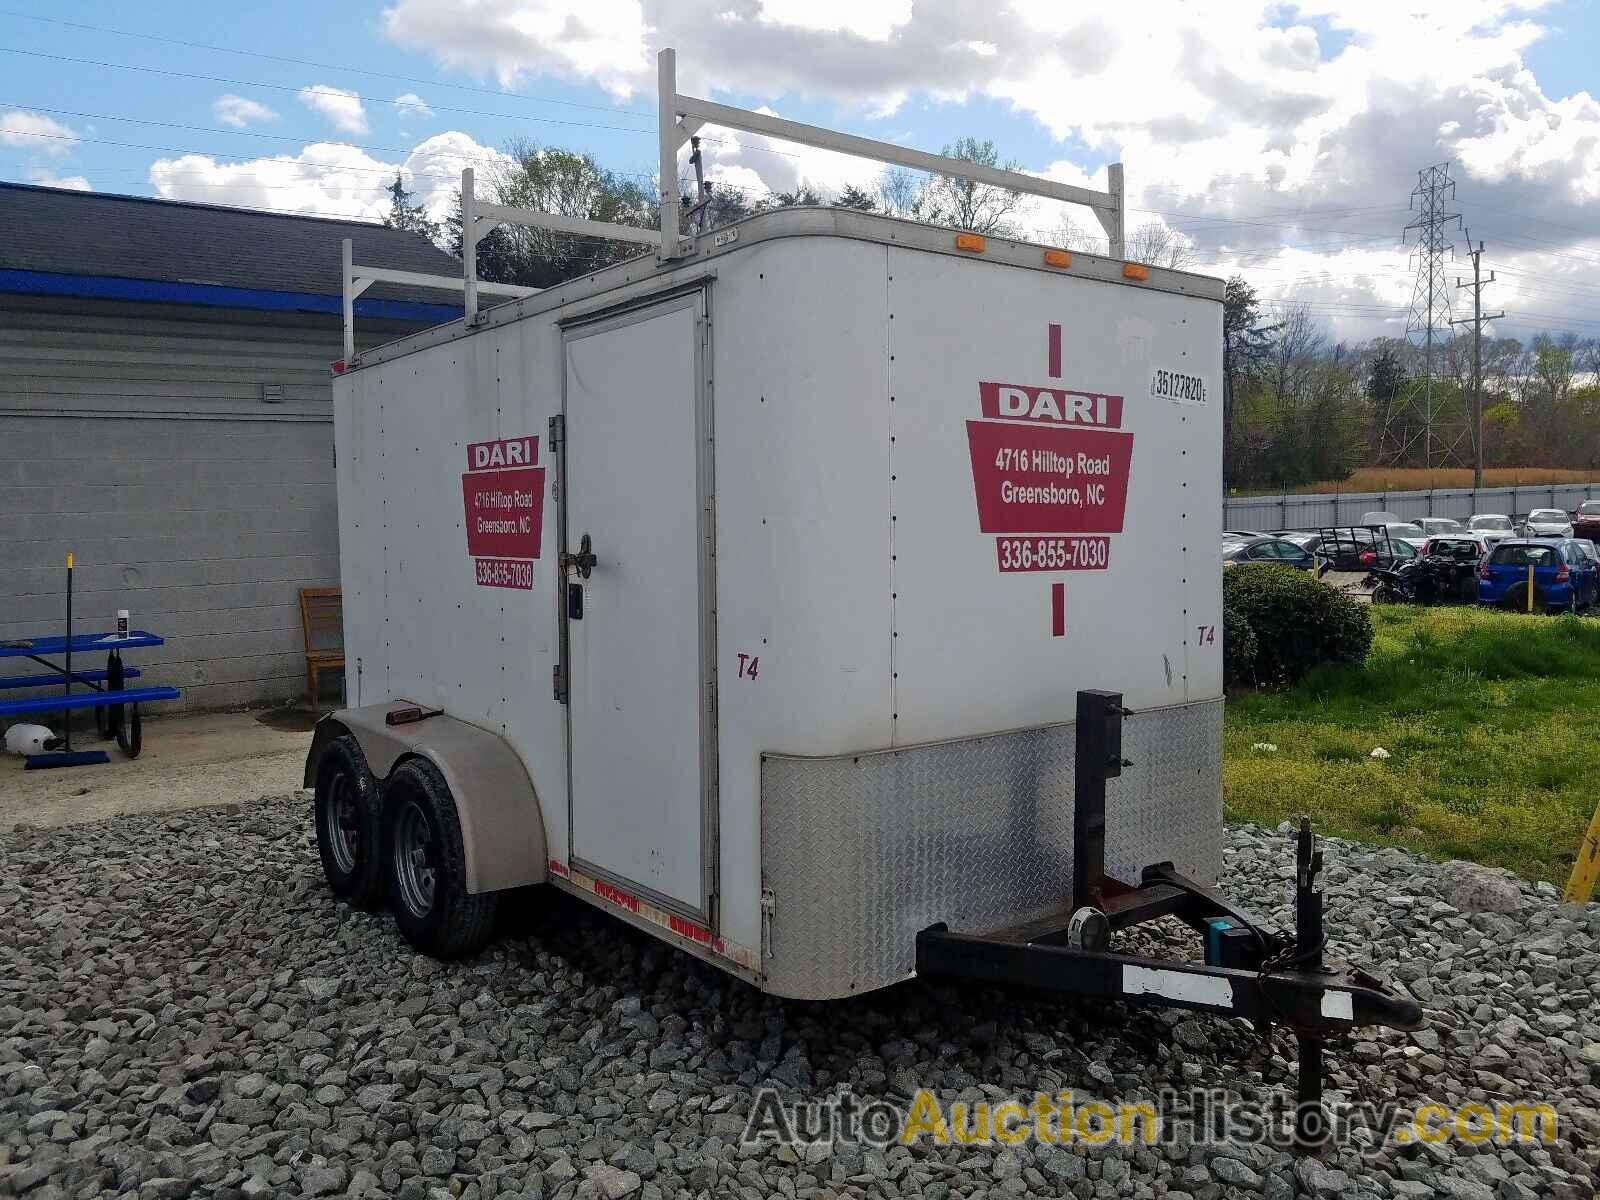 2010 TRAL TRAILER, 517BE1228AD002304